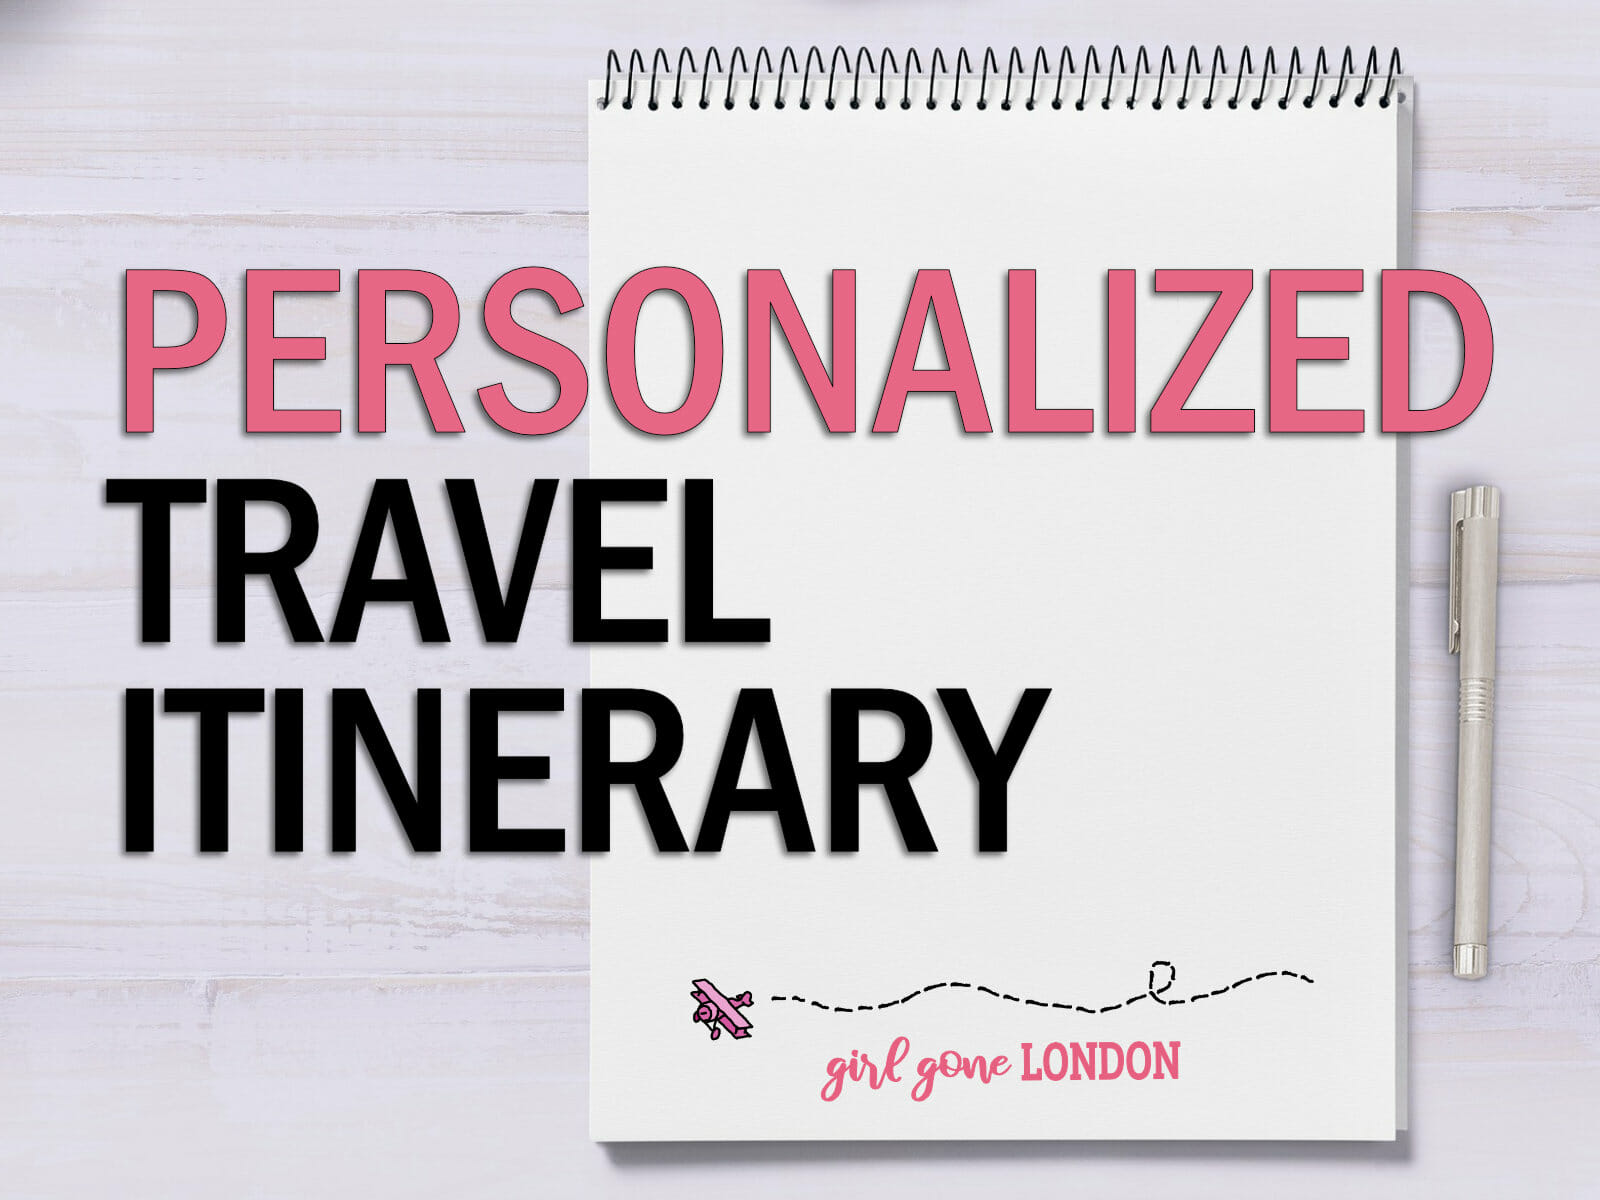 Personalized Travel Itinerary - Girl Gone London Courses